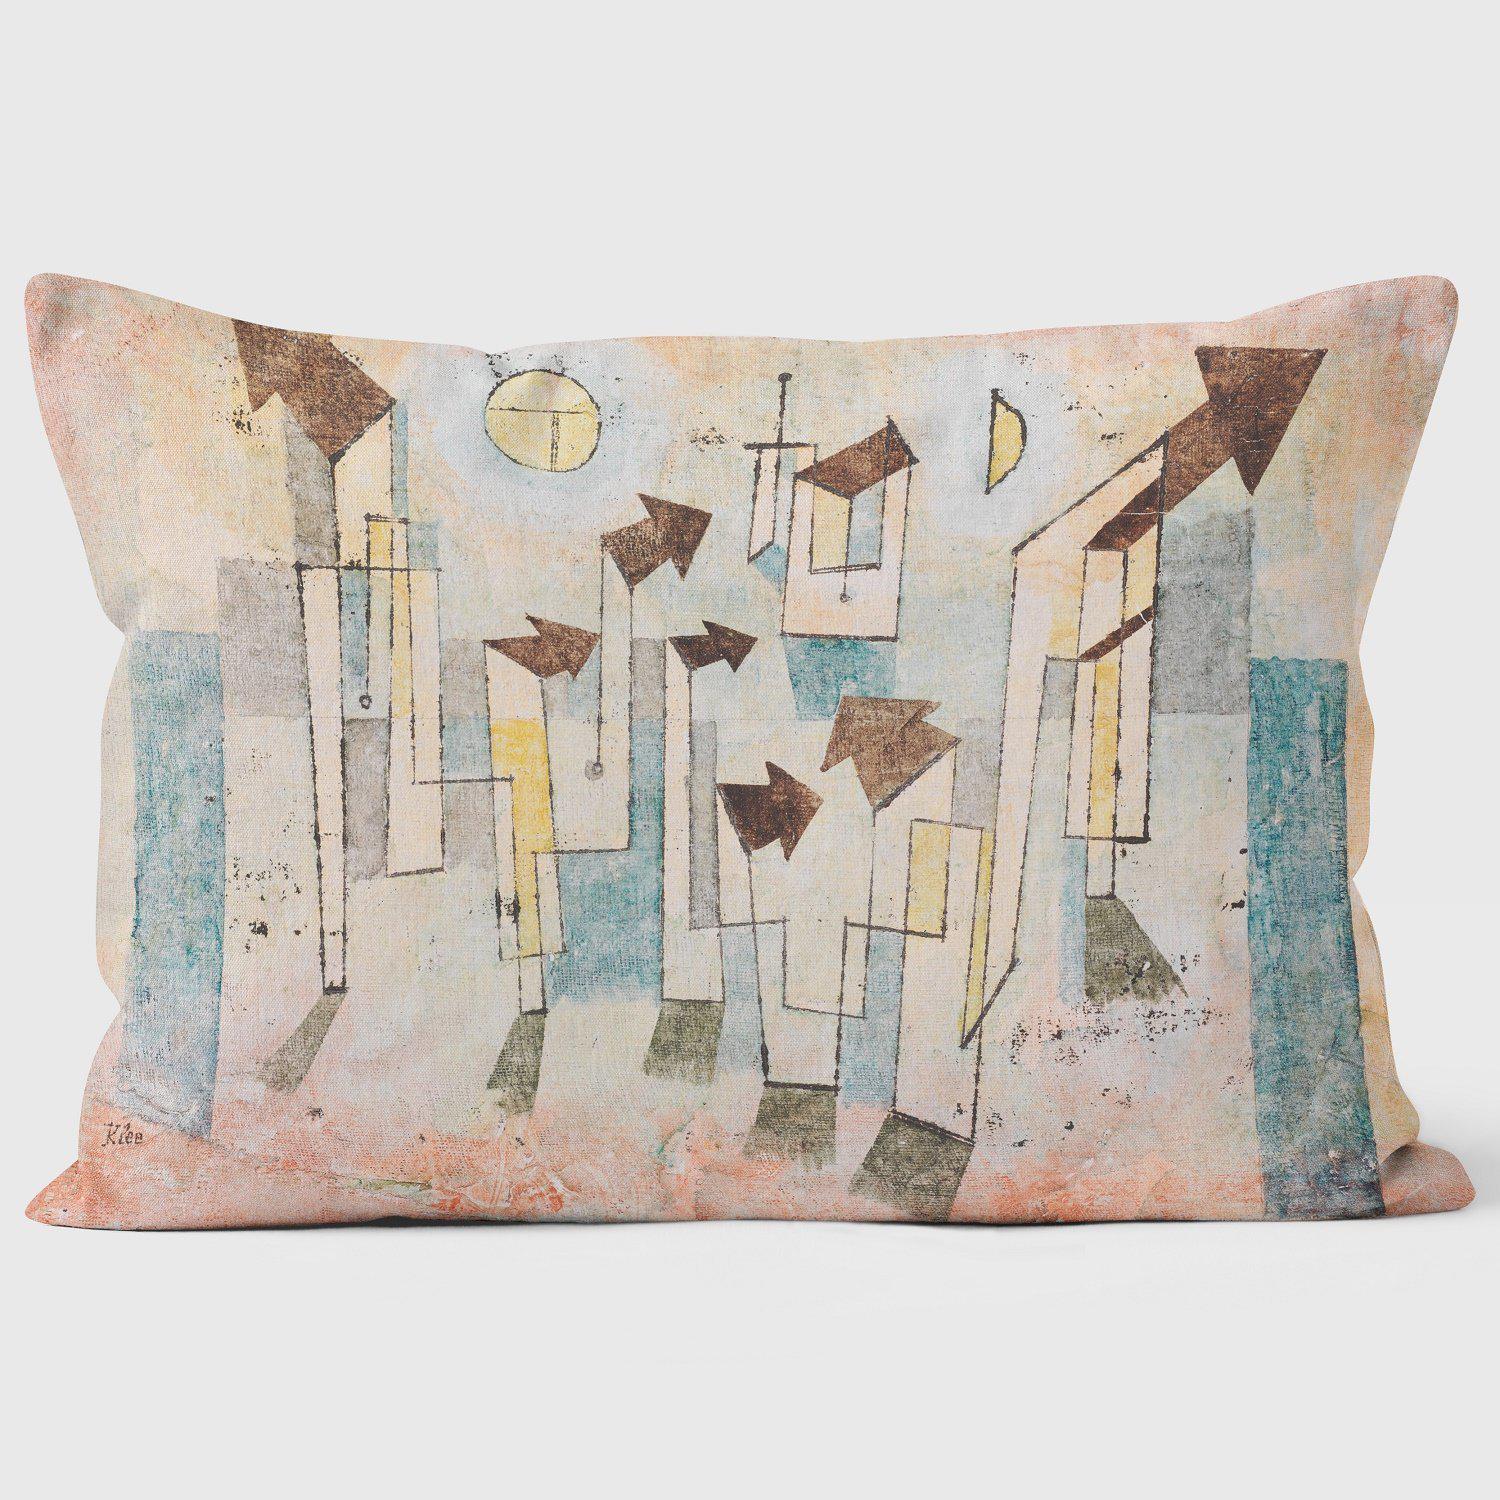 Mural From The Temple Of Longing Thither - Paul Klee Cushion - Handmade Cushions UK - WeLoveCushions